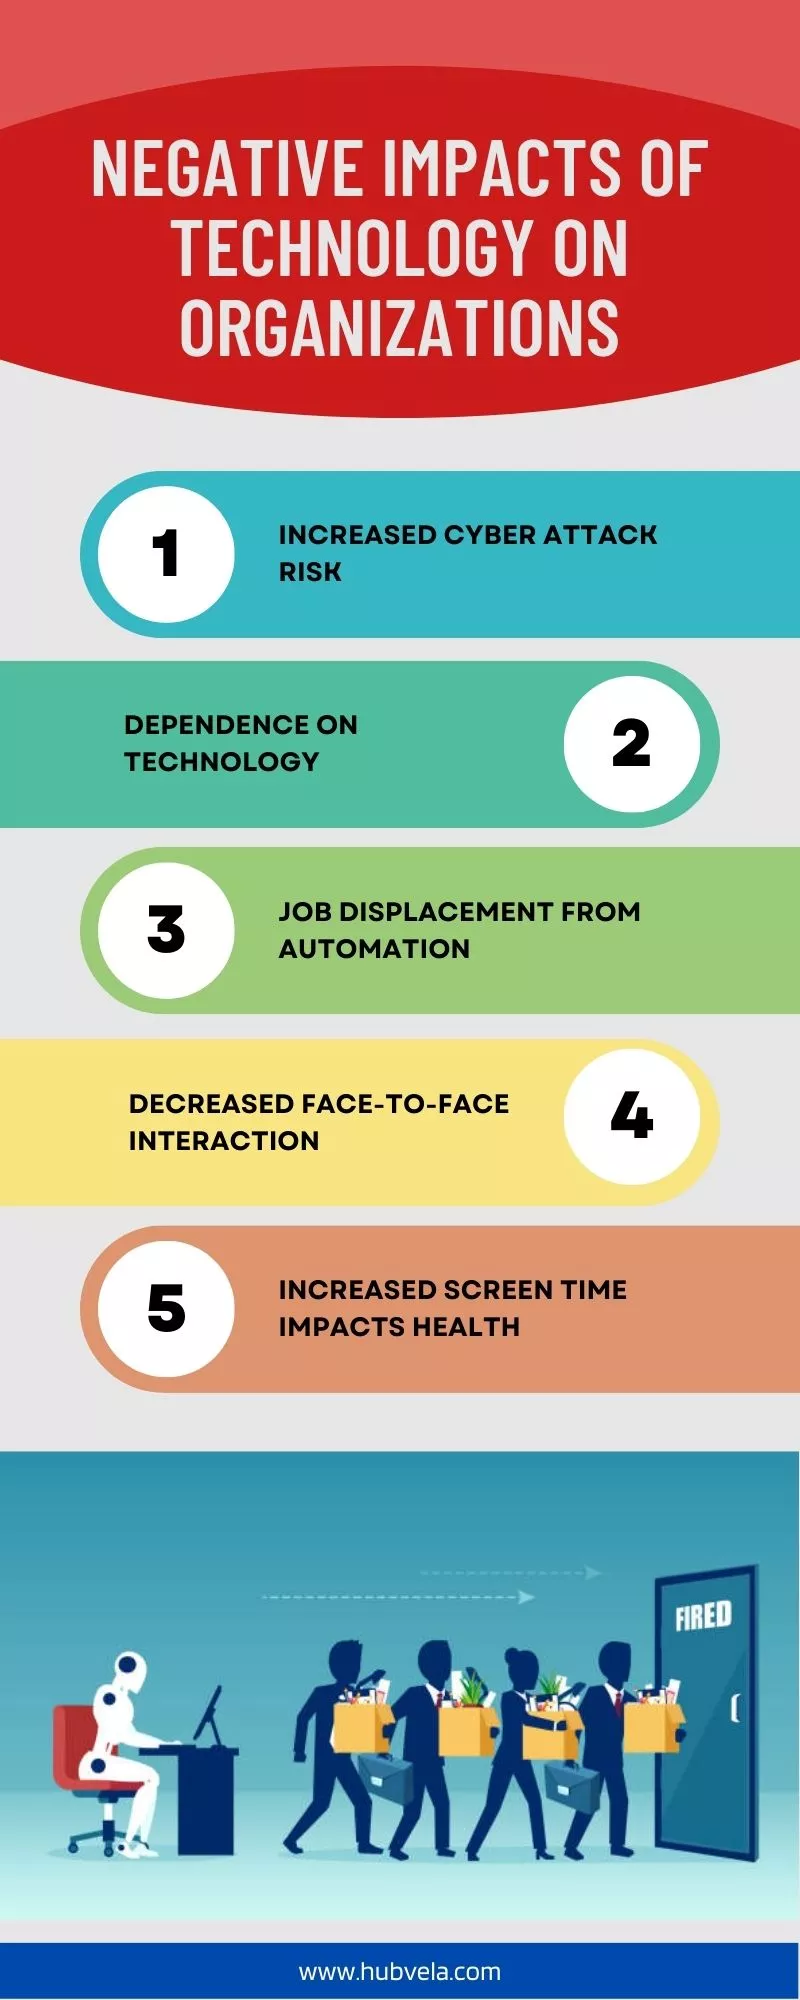 Negative Impacts of Technology on Organizations infographic